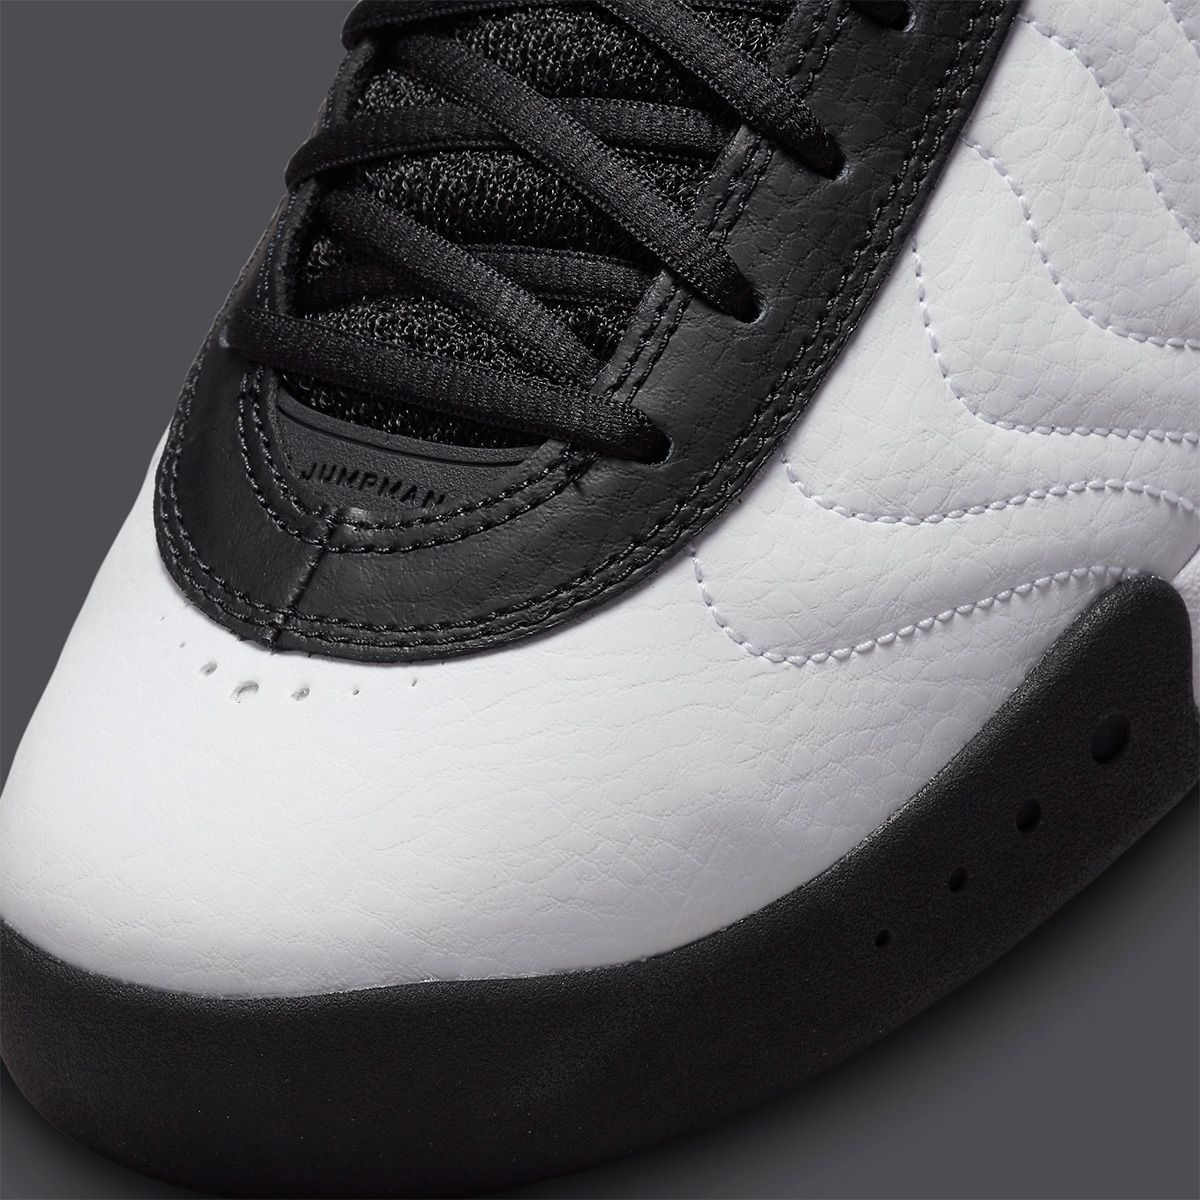 The Jordan Jumpman Pro Appears in a Bulls-Friendly Black, White and Red ...